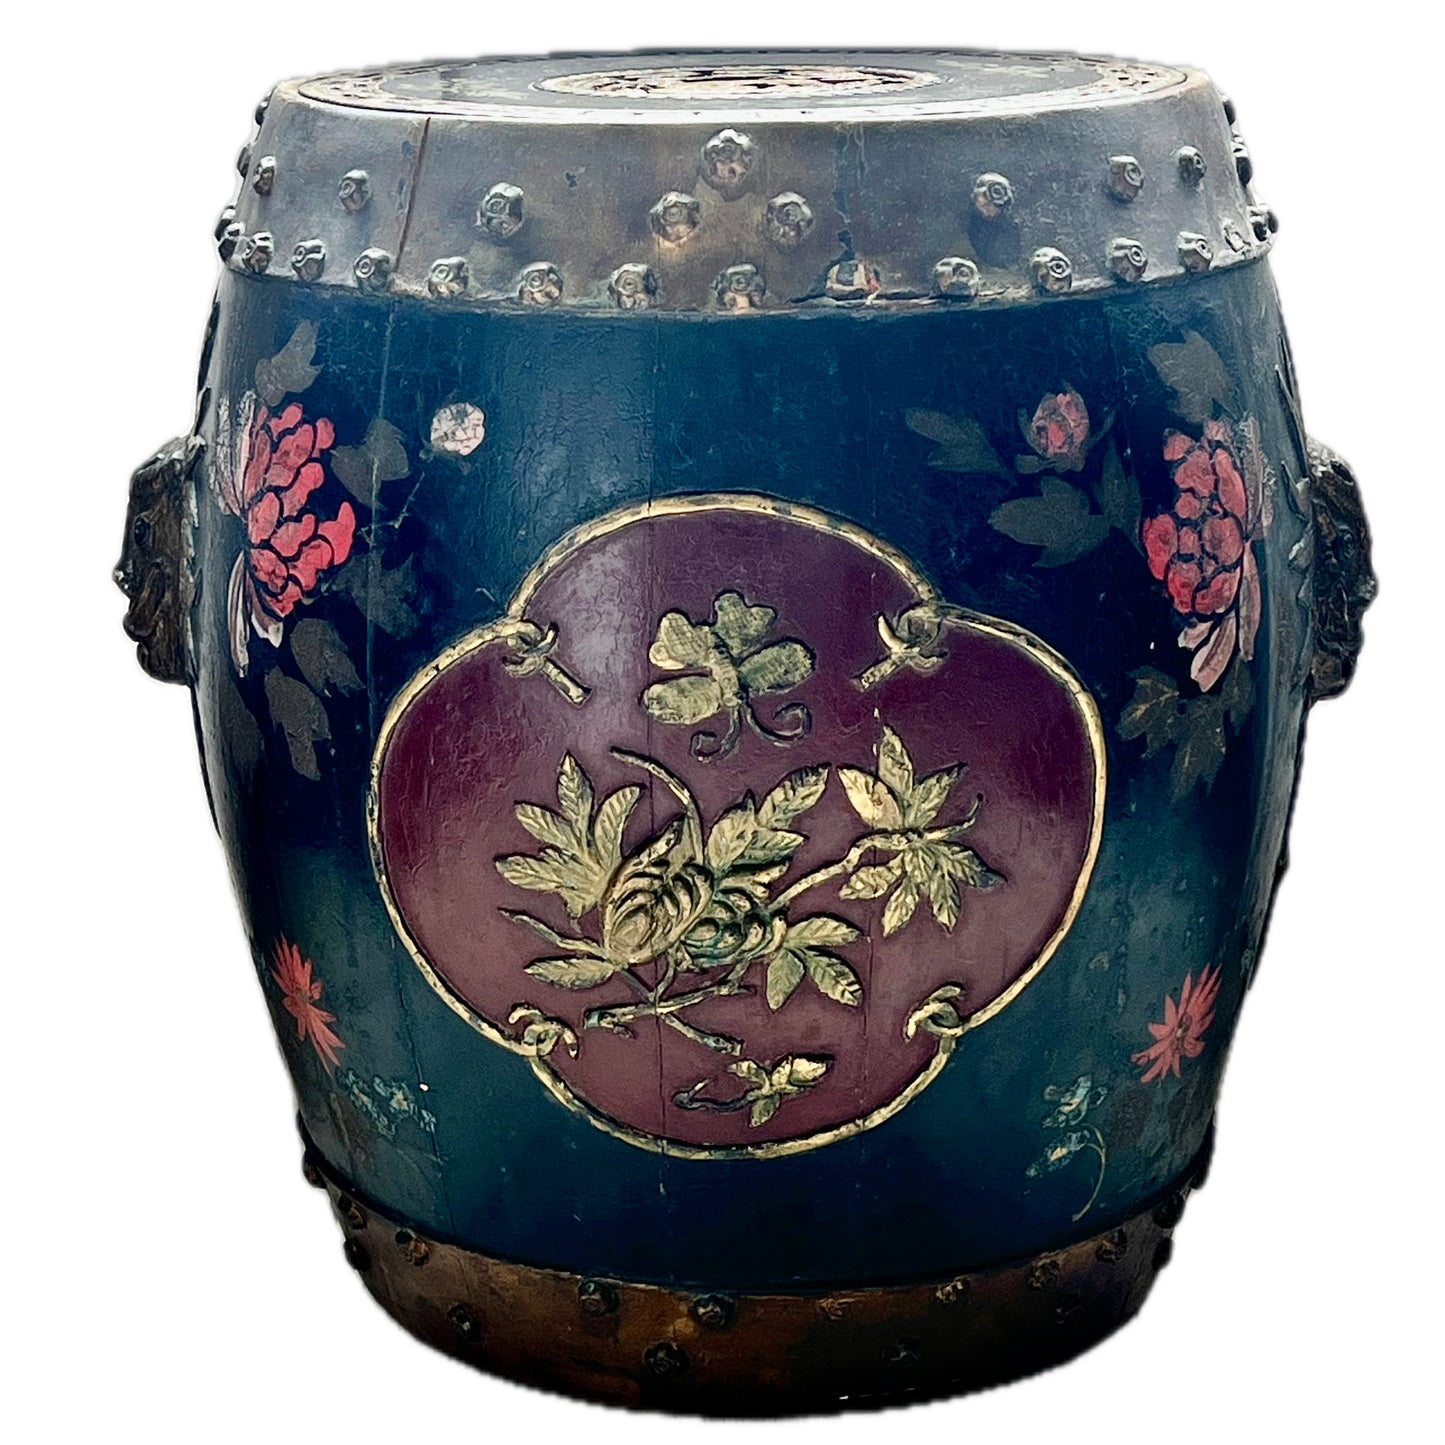 Rare and stunning pair of mid to late 19th century Qing Dynasty hand-painted and lacquered spice barrels